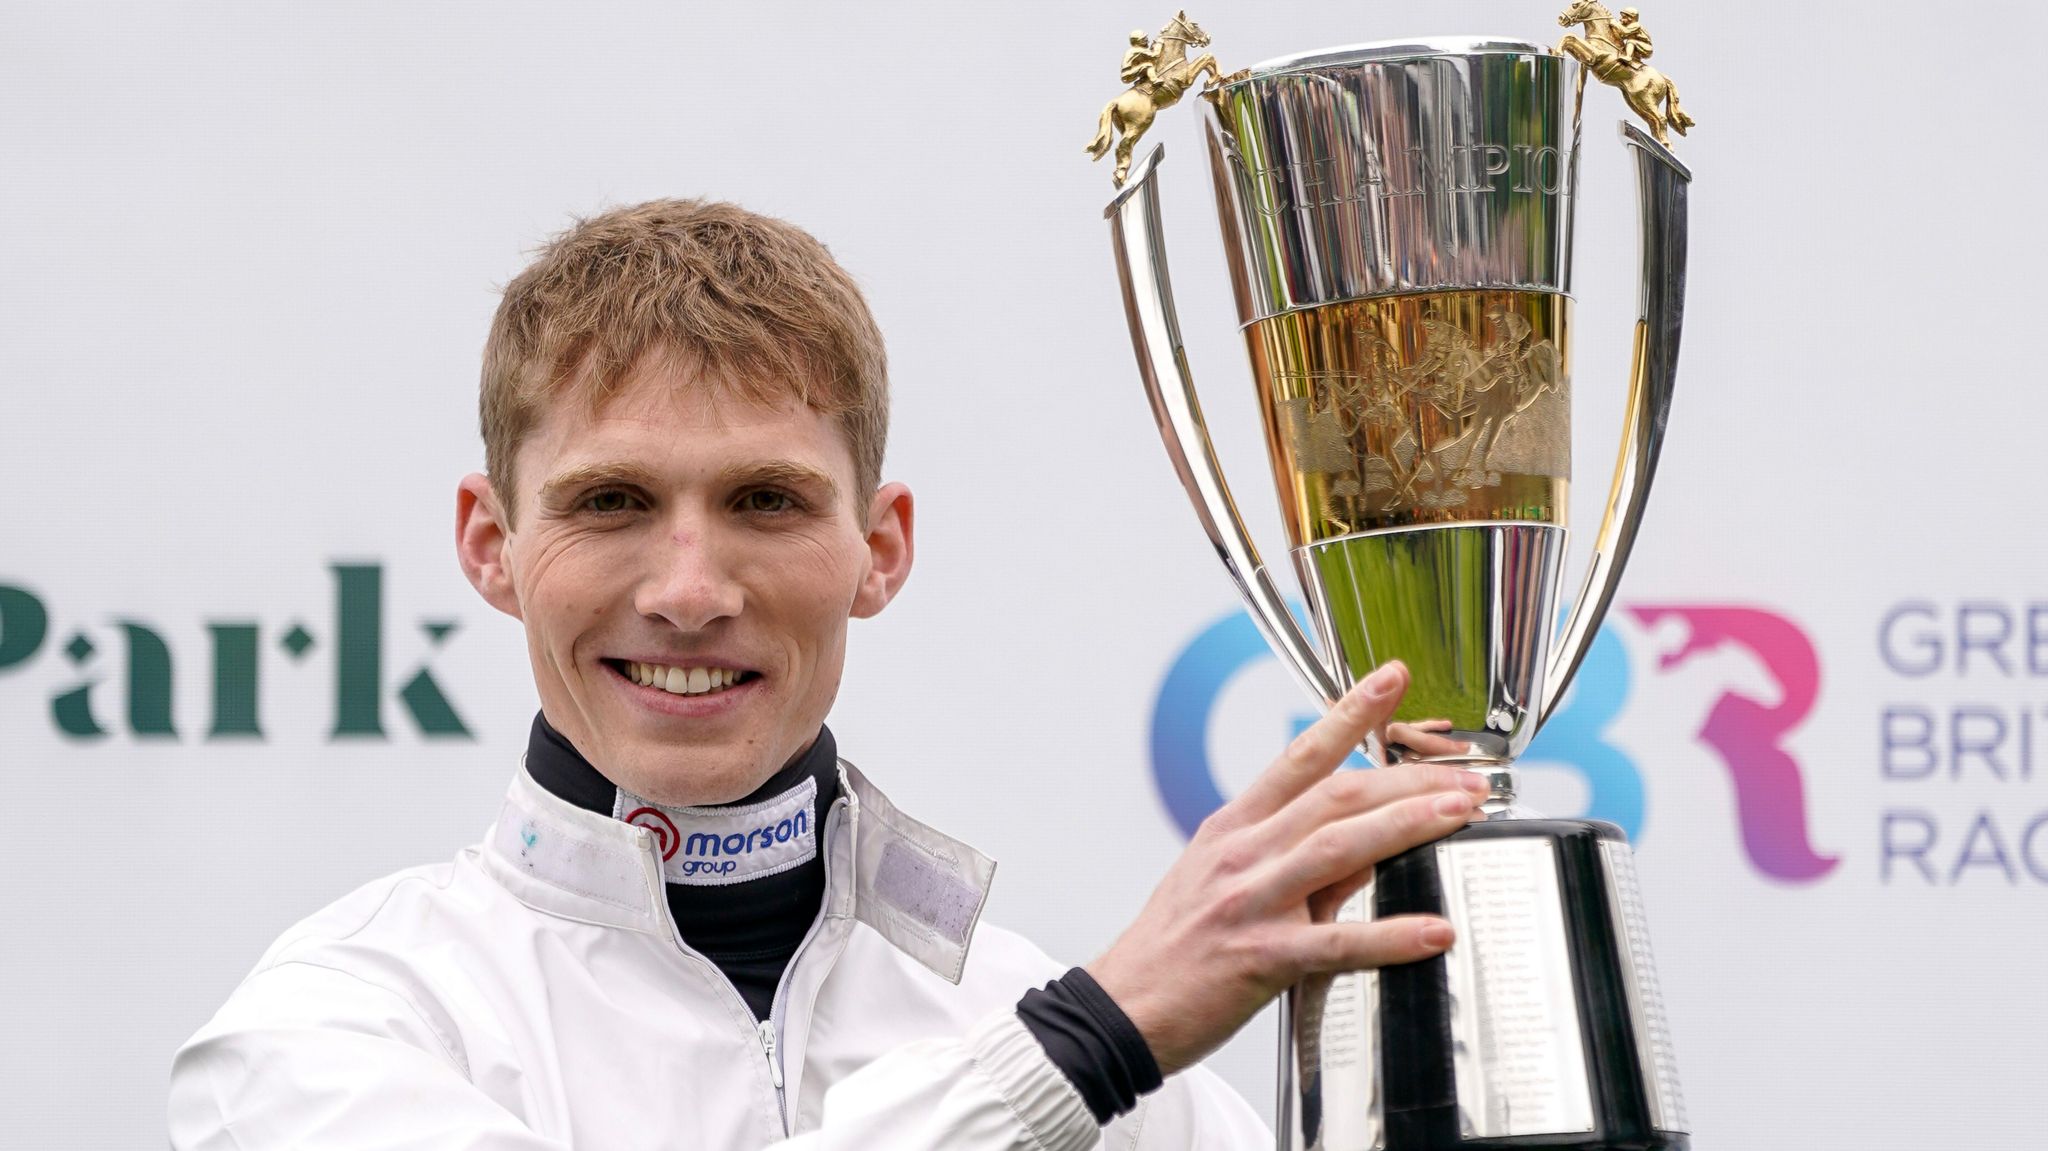 ‘A relief’ to clinch jump jockey title – Cobden